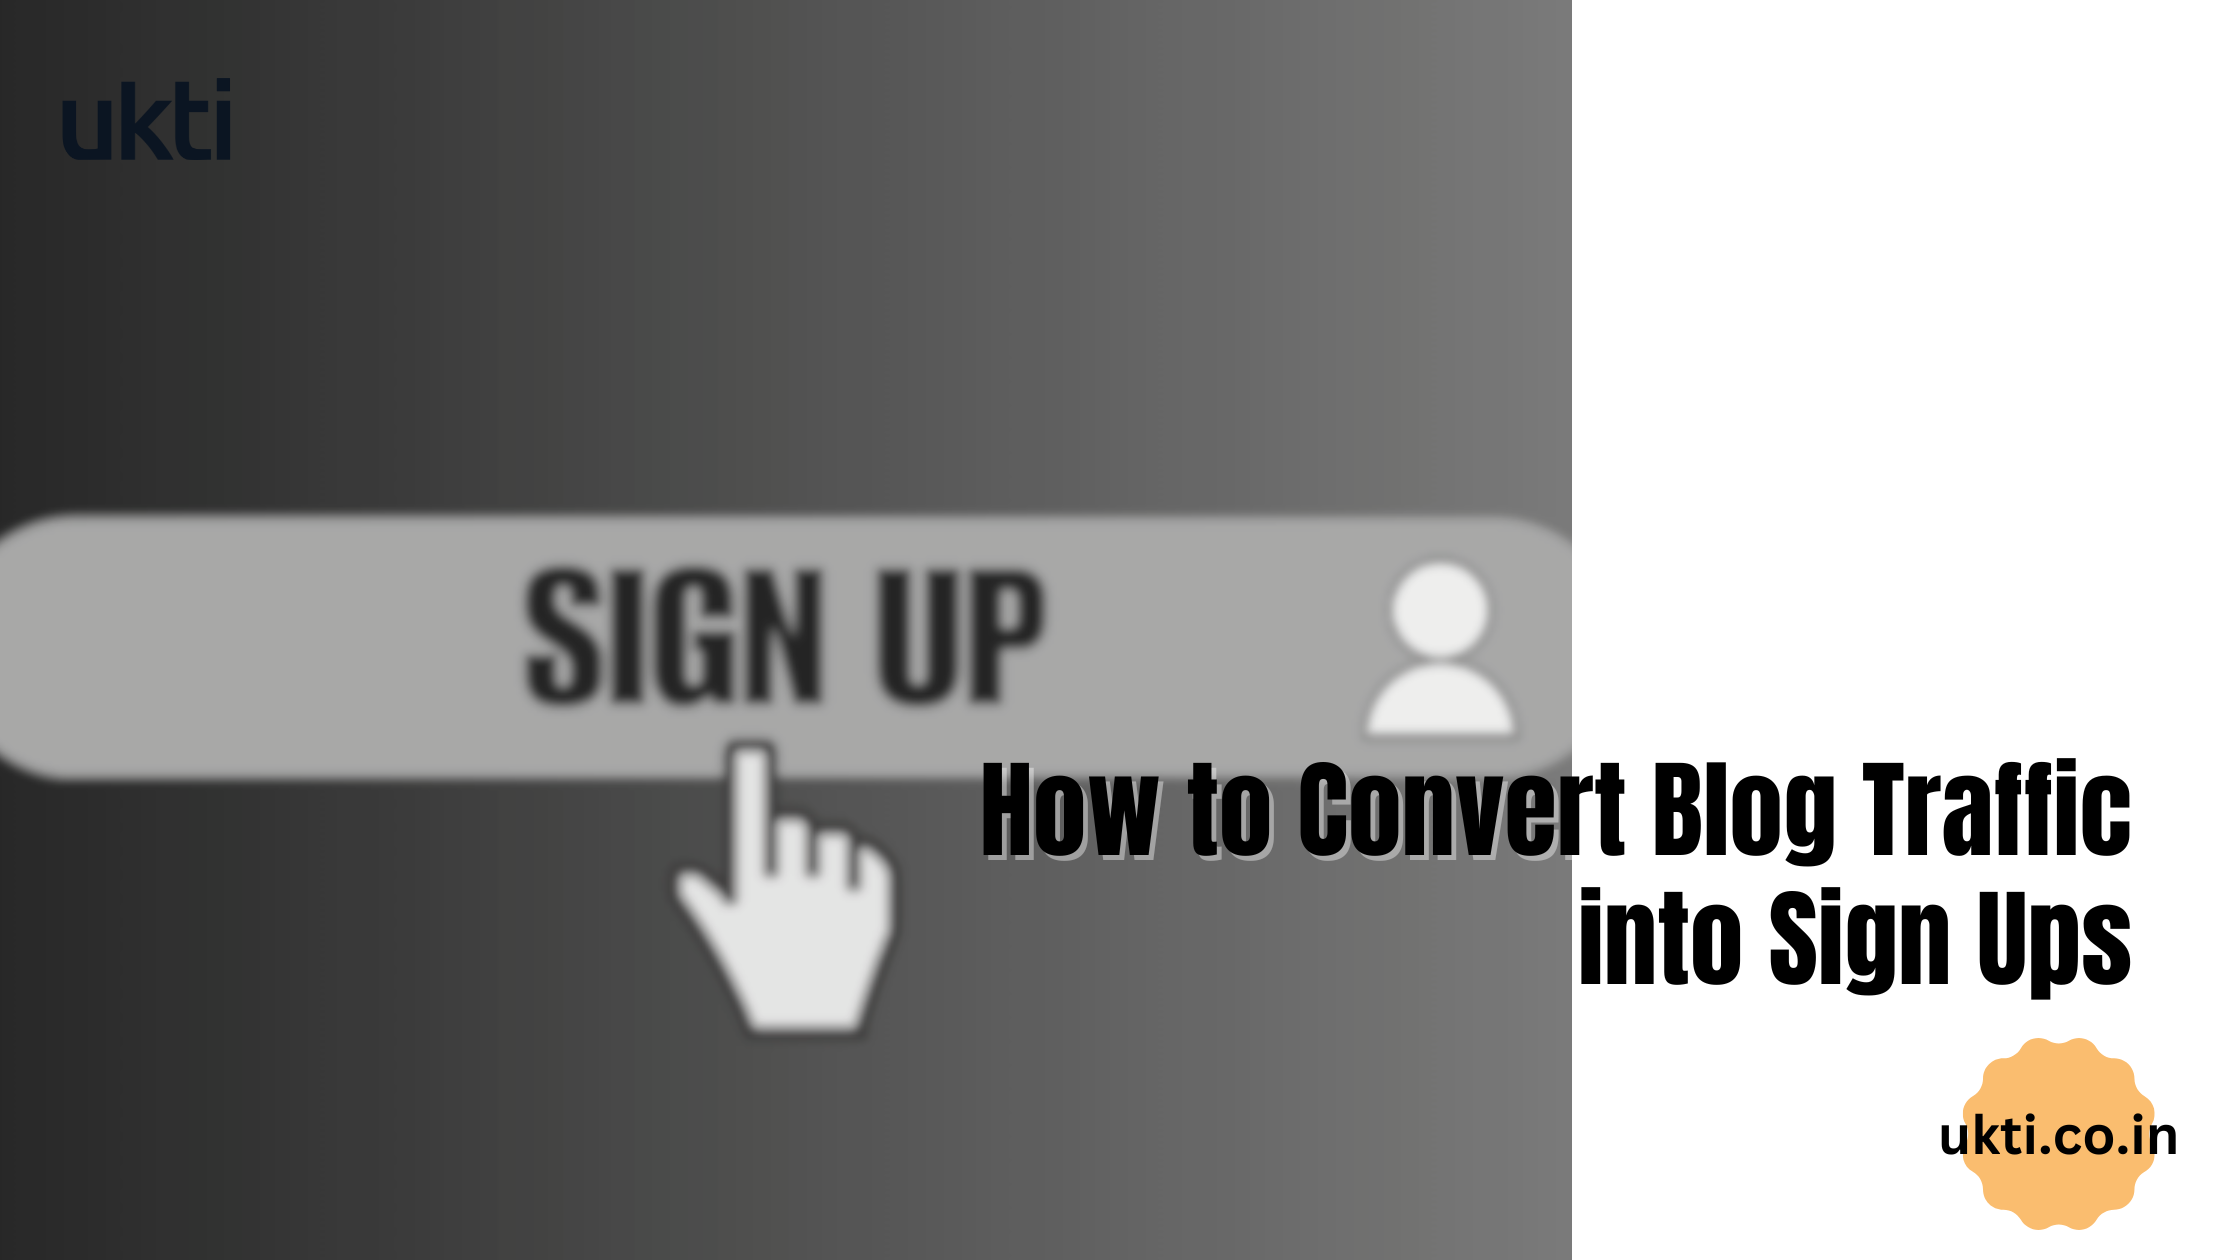 How to Convert Blog Traffic into Sign Ups